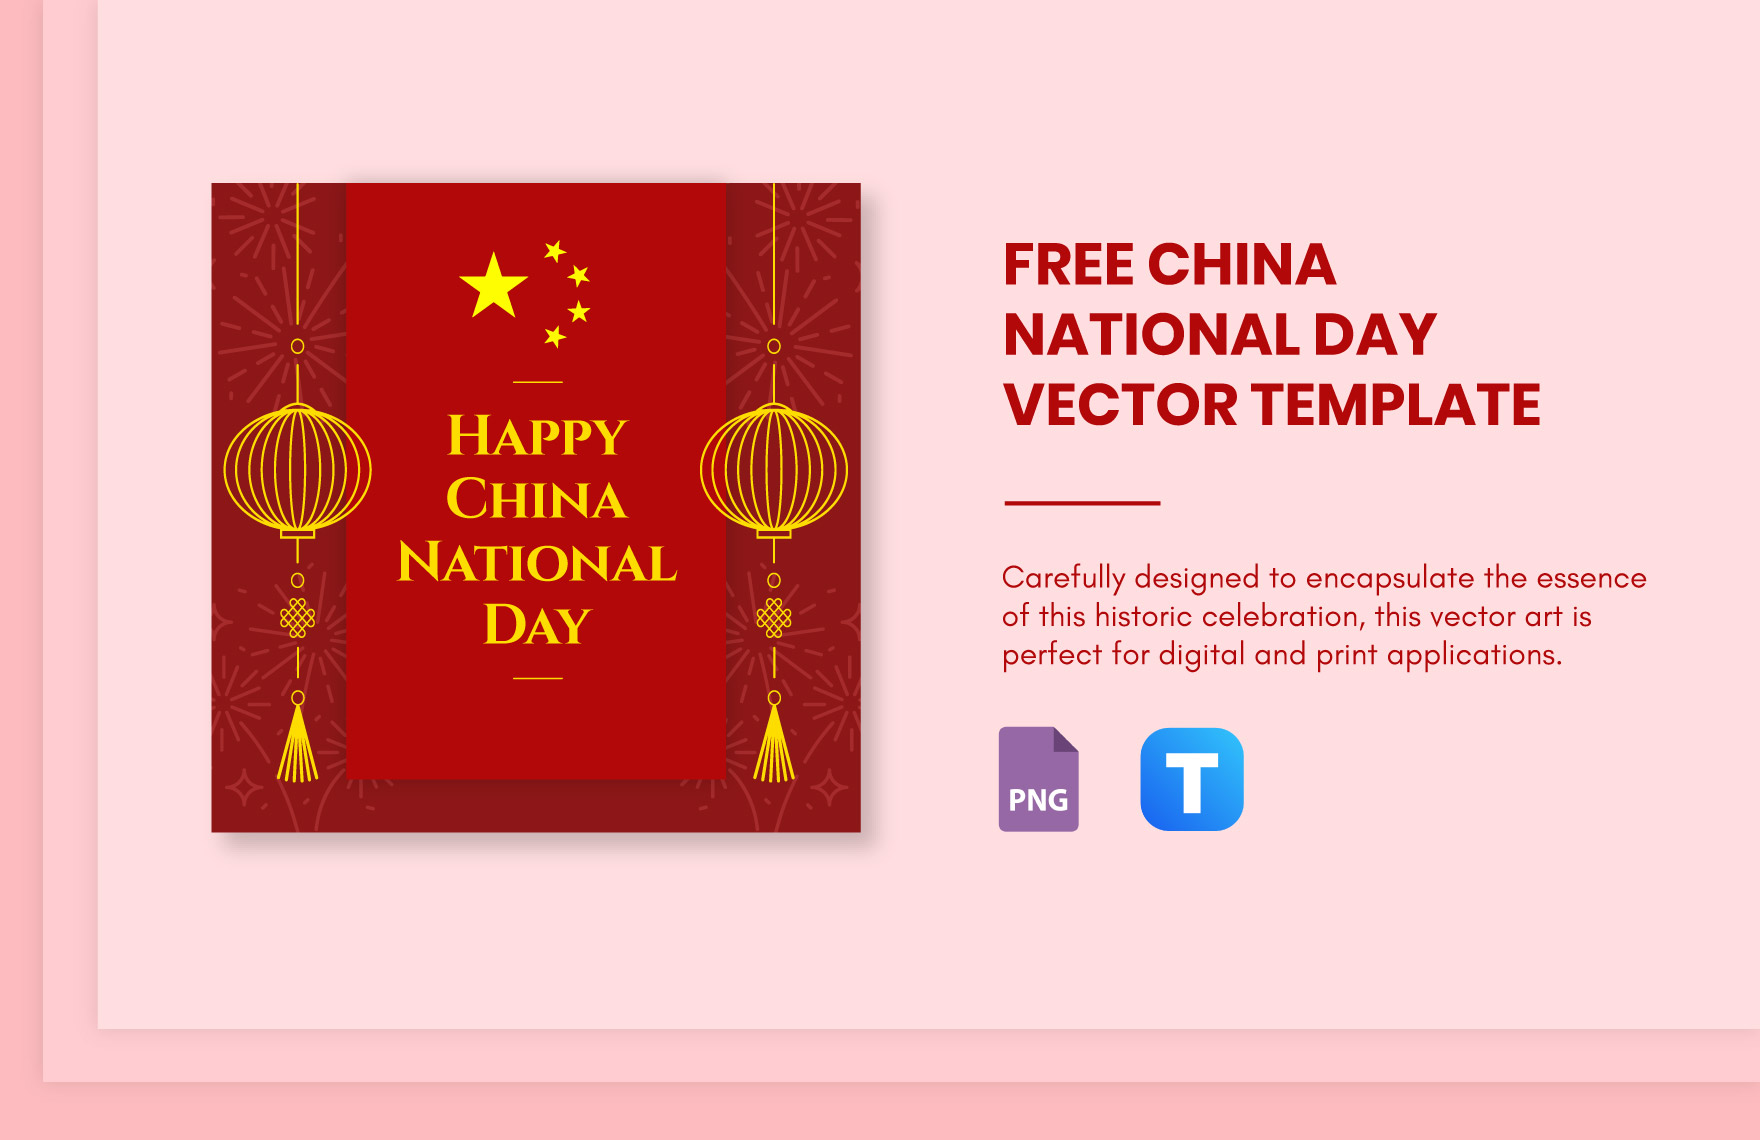 Free China National Day Vector in PNG